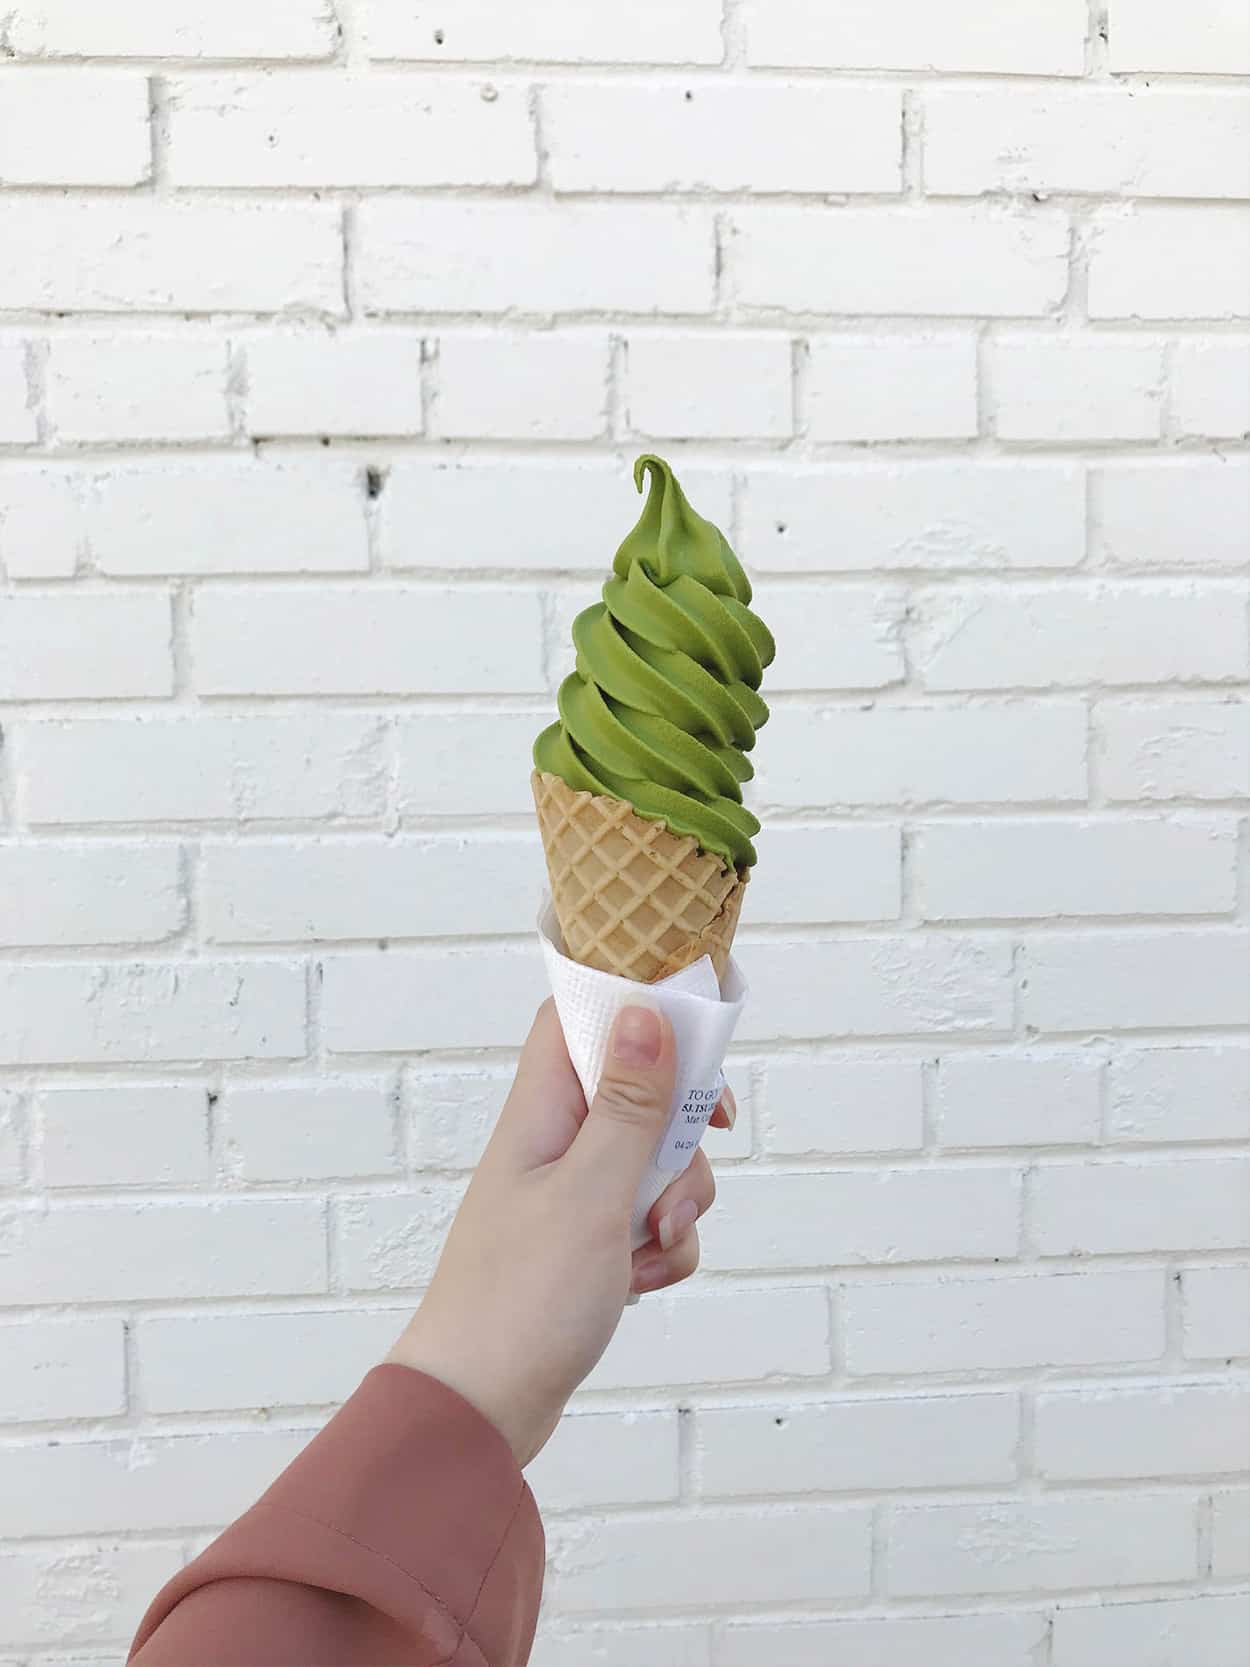 Matcha soft serve from Daigyo Cafe in North York, Toronto